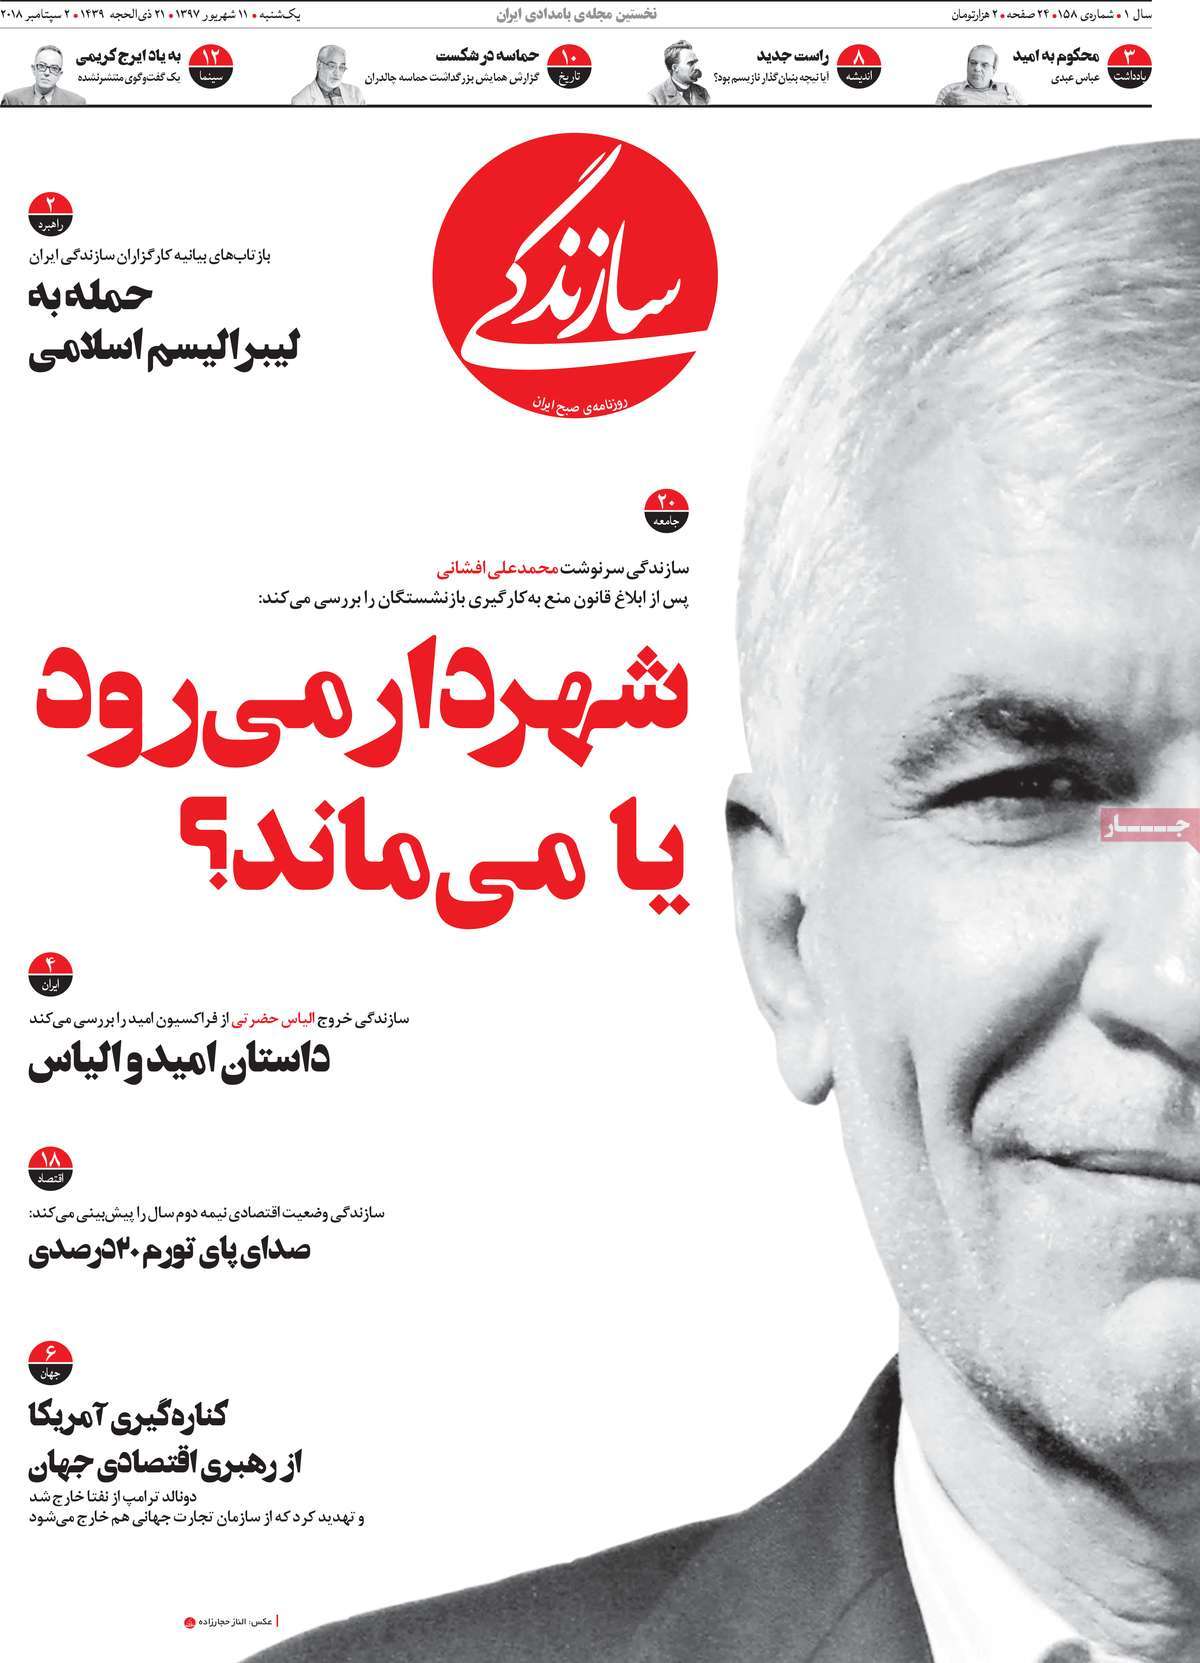 A Look at Iranian Newspaper Front Pages on September 2